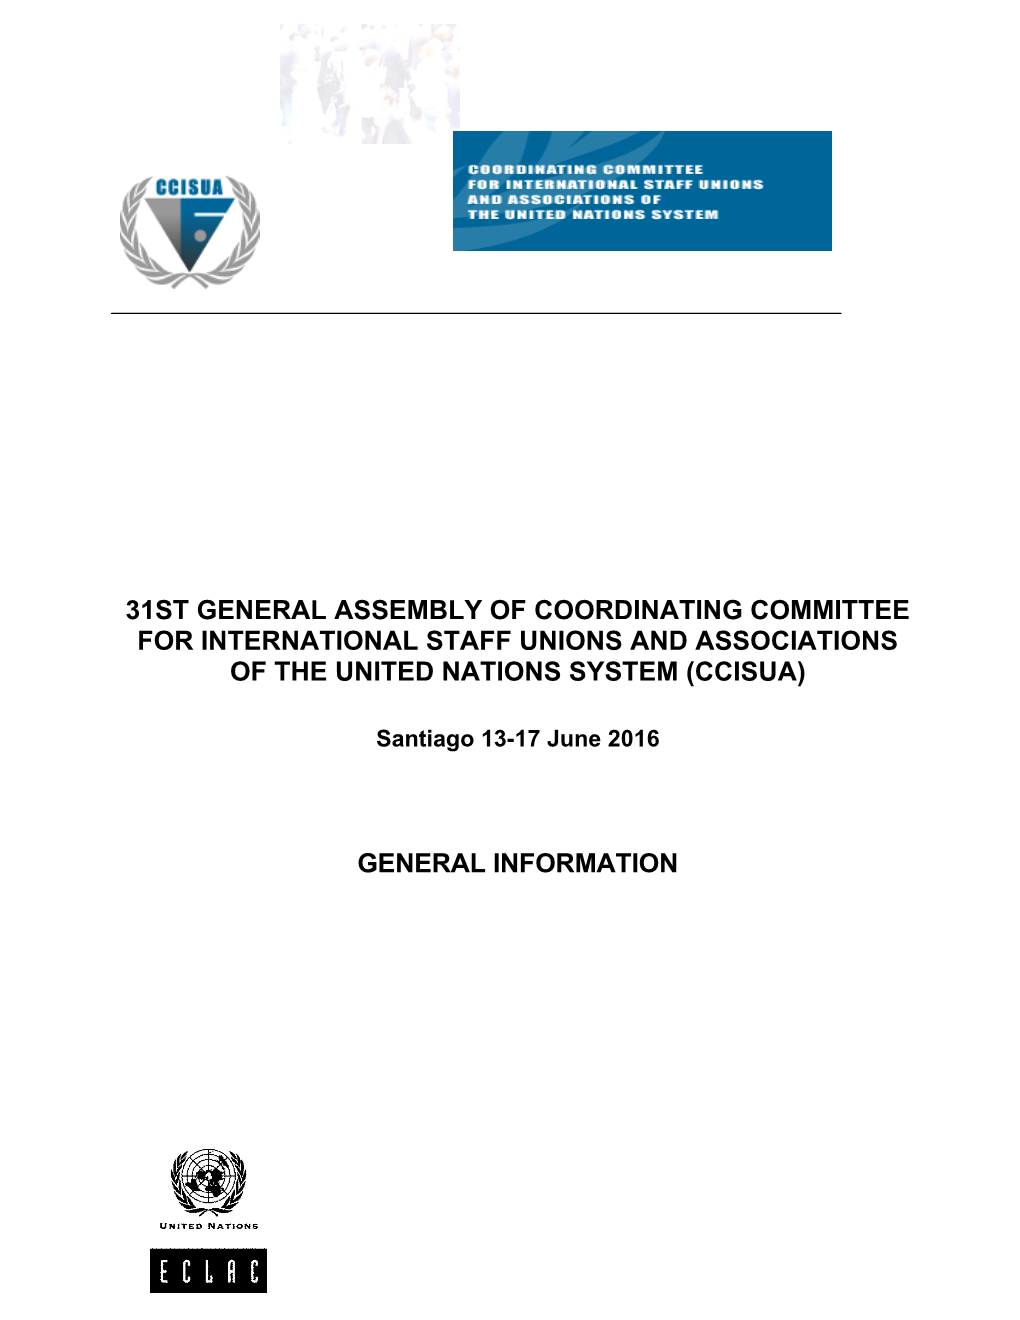 31St General Assembly of Coordinating Committee for International Staff Unions and Associations